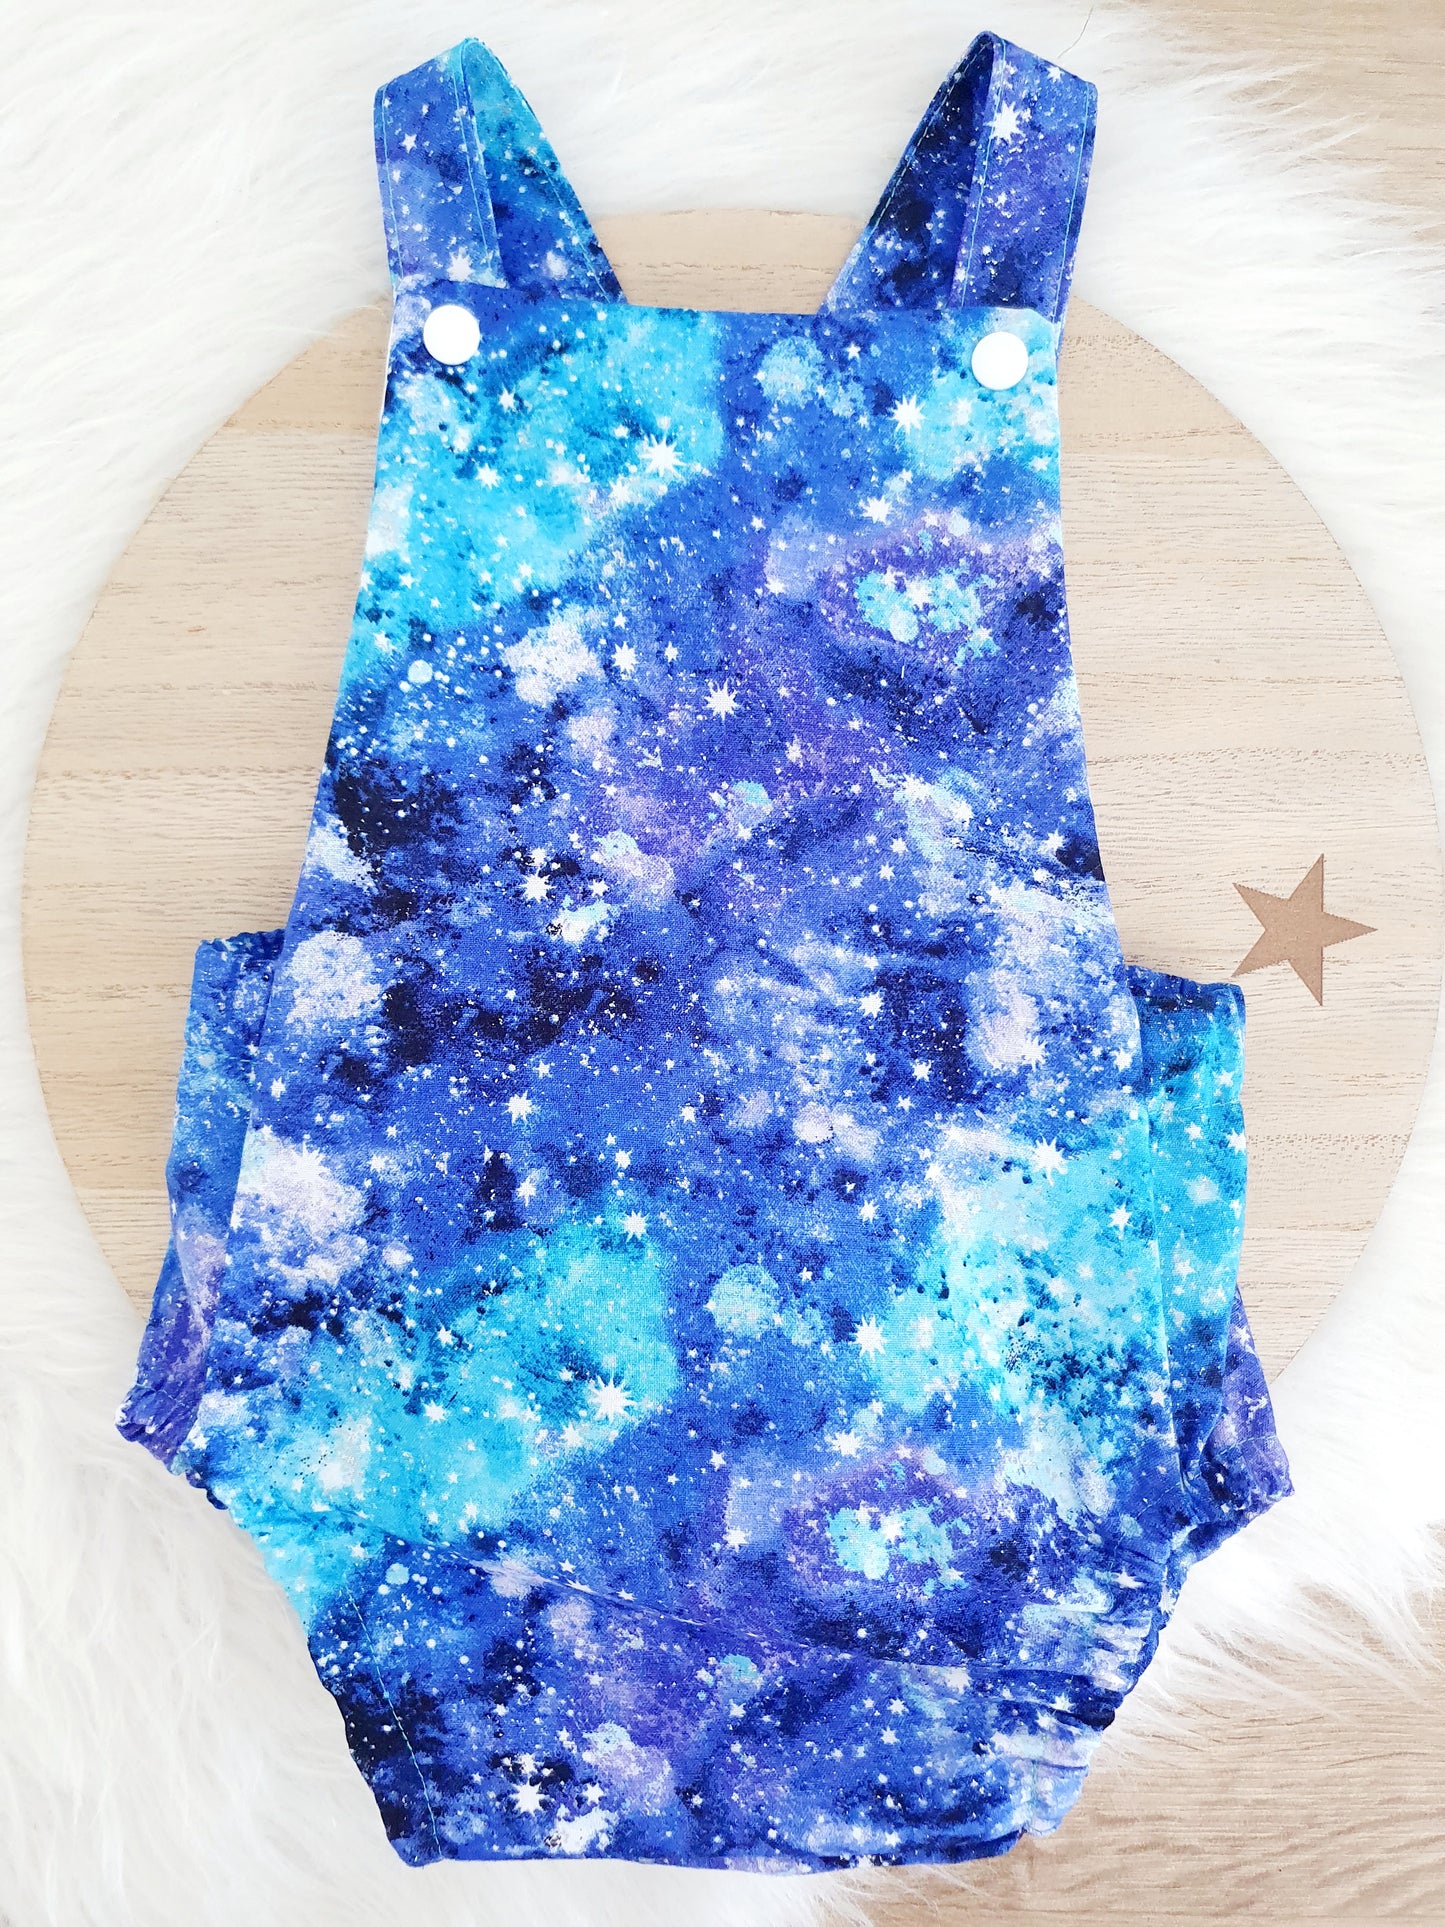 GALAXY / SPACE Baby Romper, Handmade Baby Clothing, Size 0 - 1st Birthday Clothing / Cake Smash Outfit - GALAXY / SPACE, 9 - 12 months